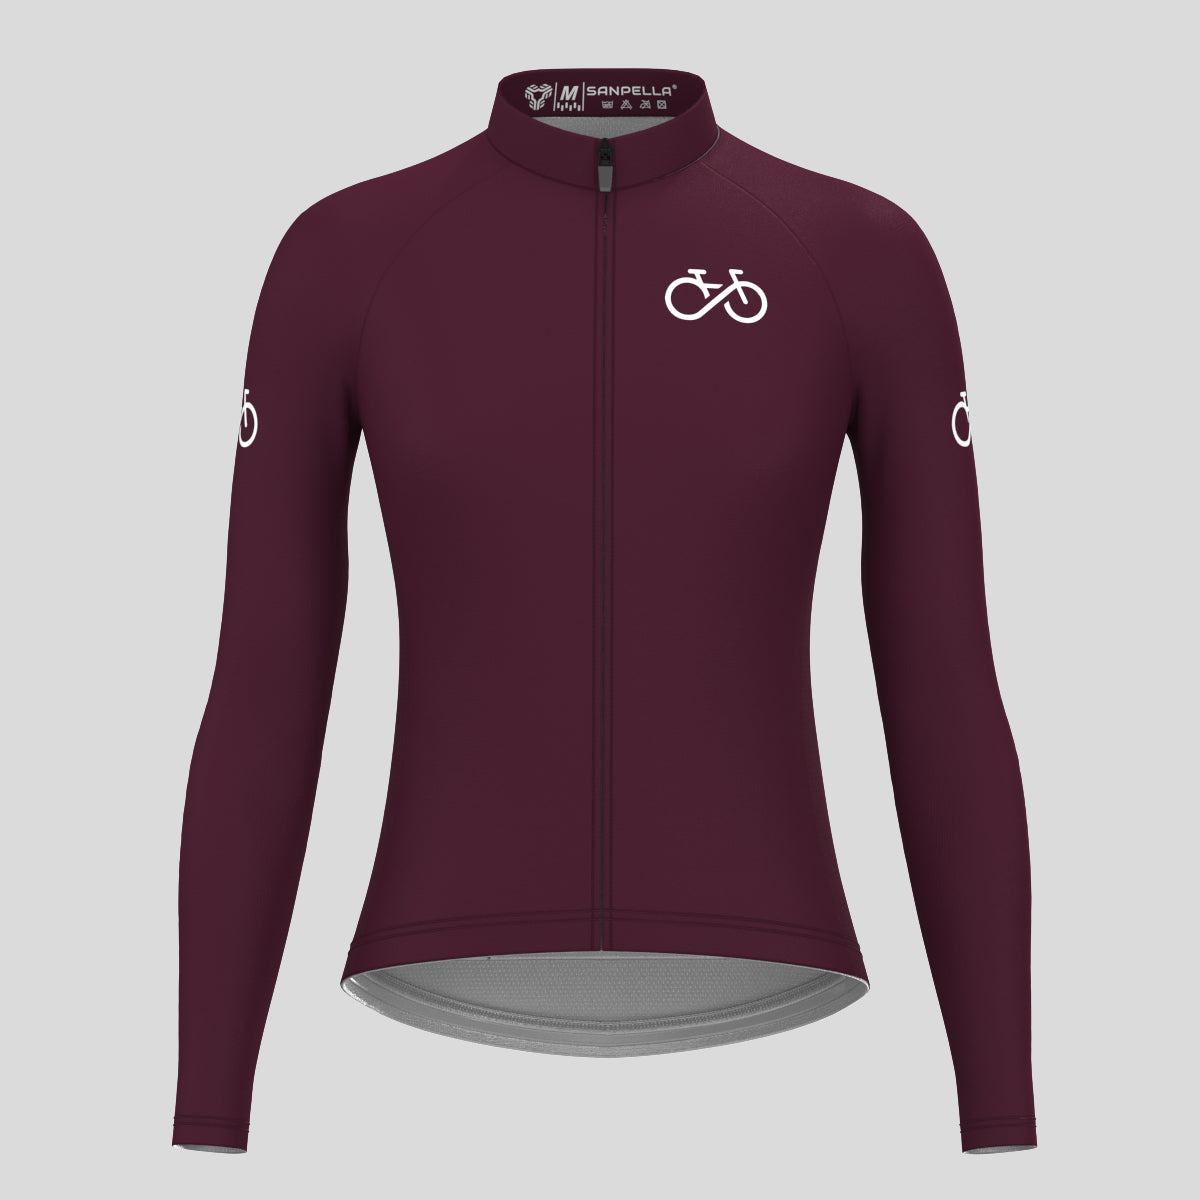 Ride Forever Women's LS Cycling Jersey - Burgundy